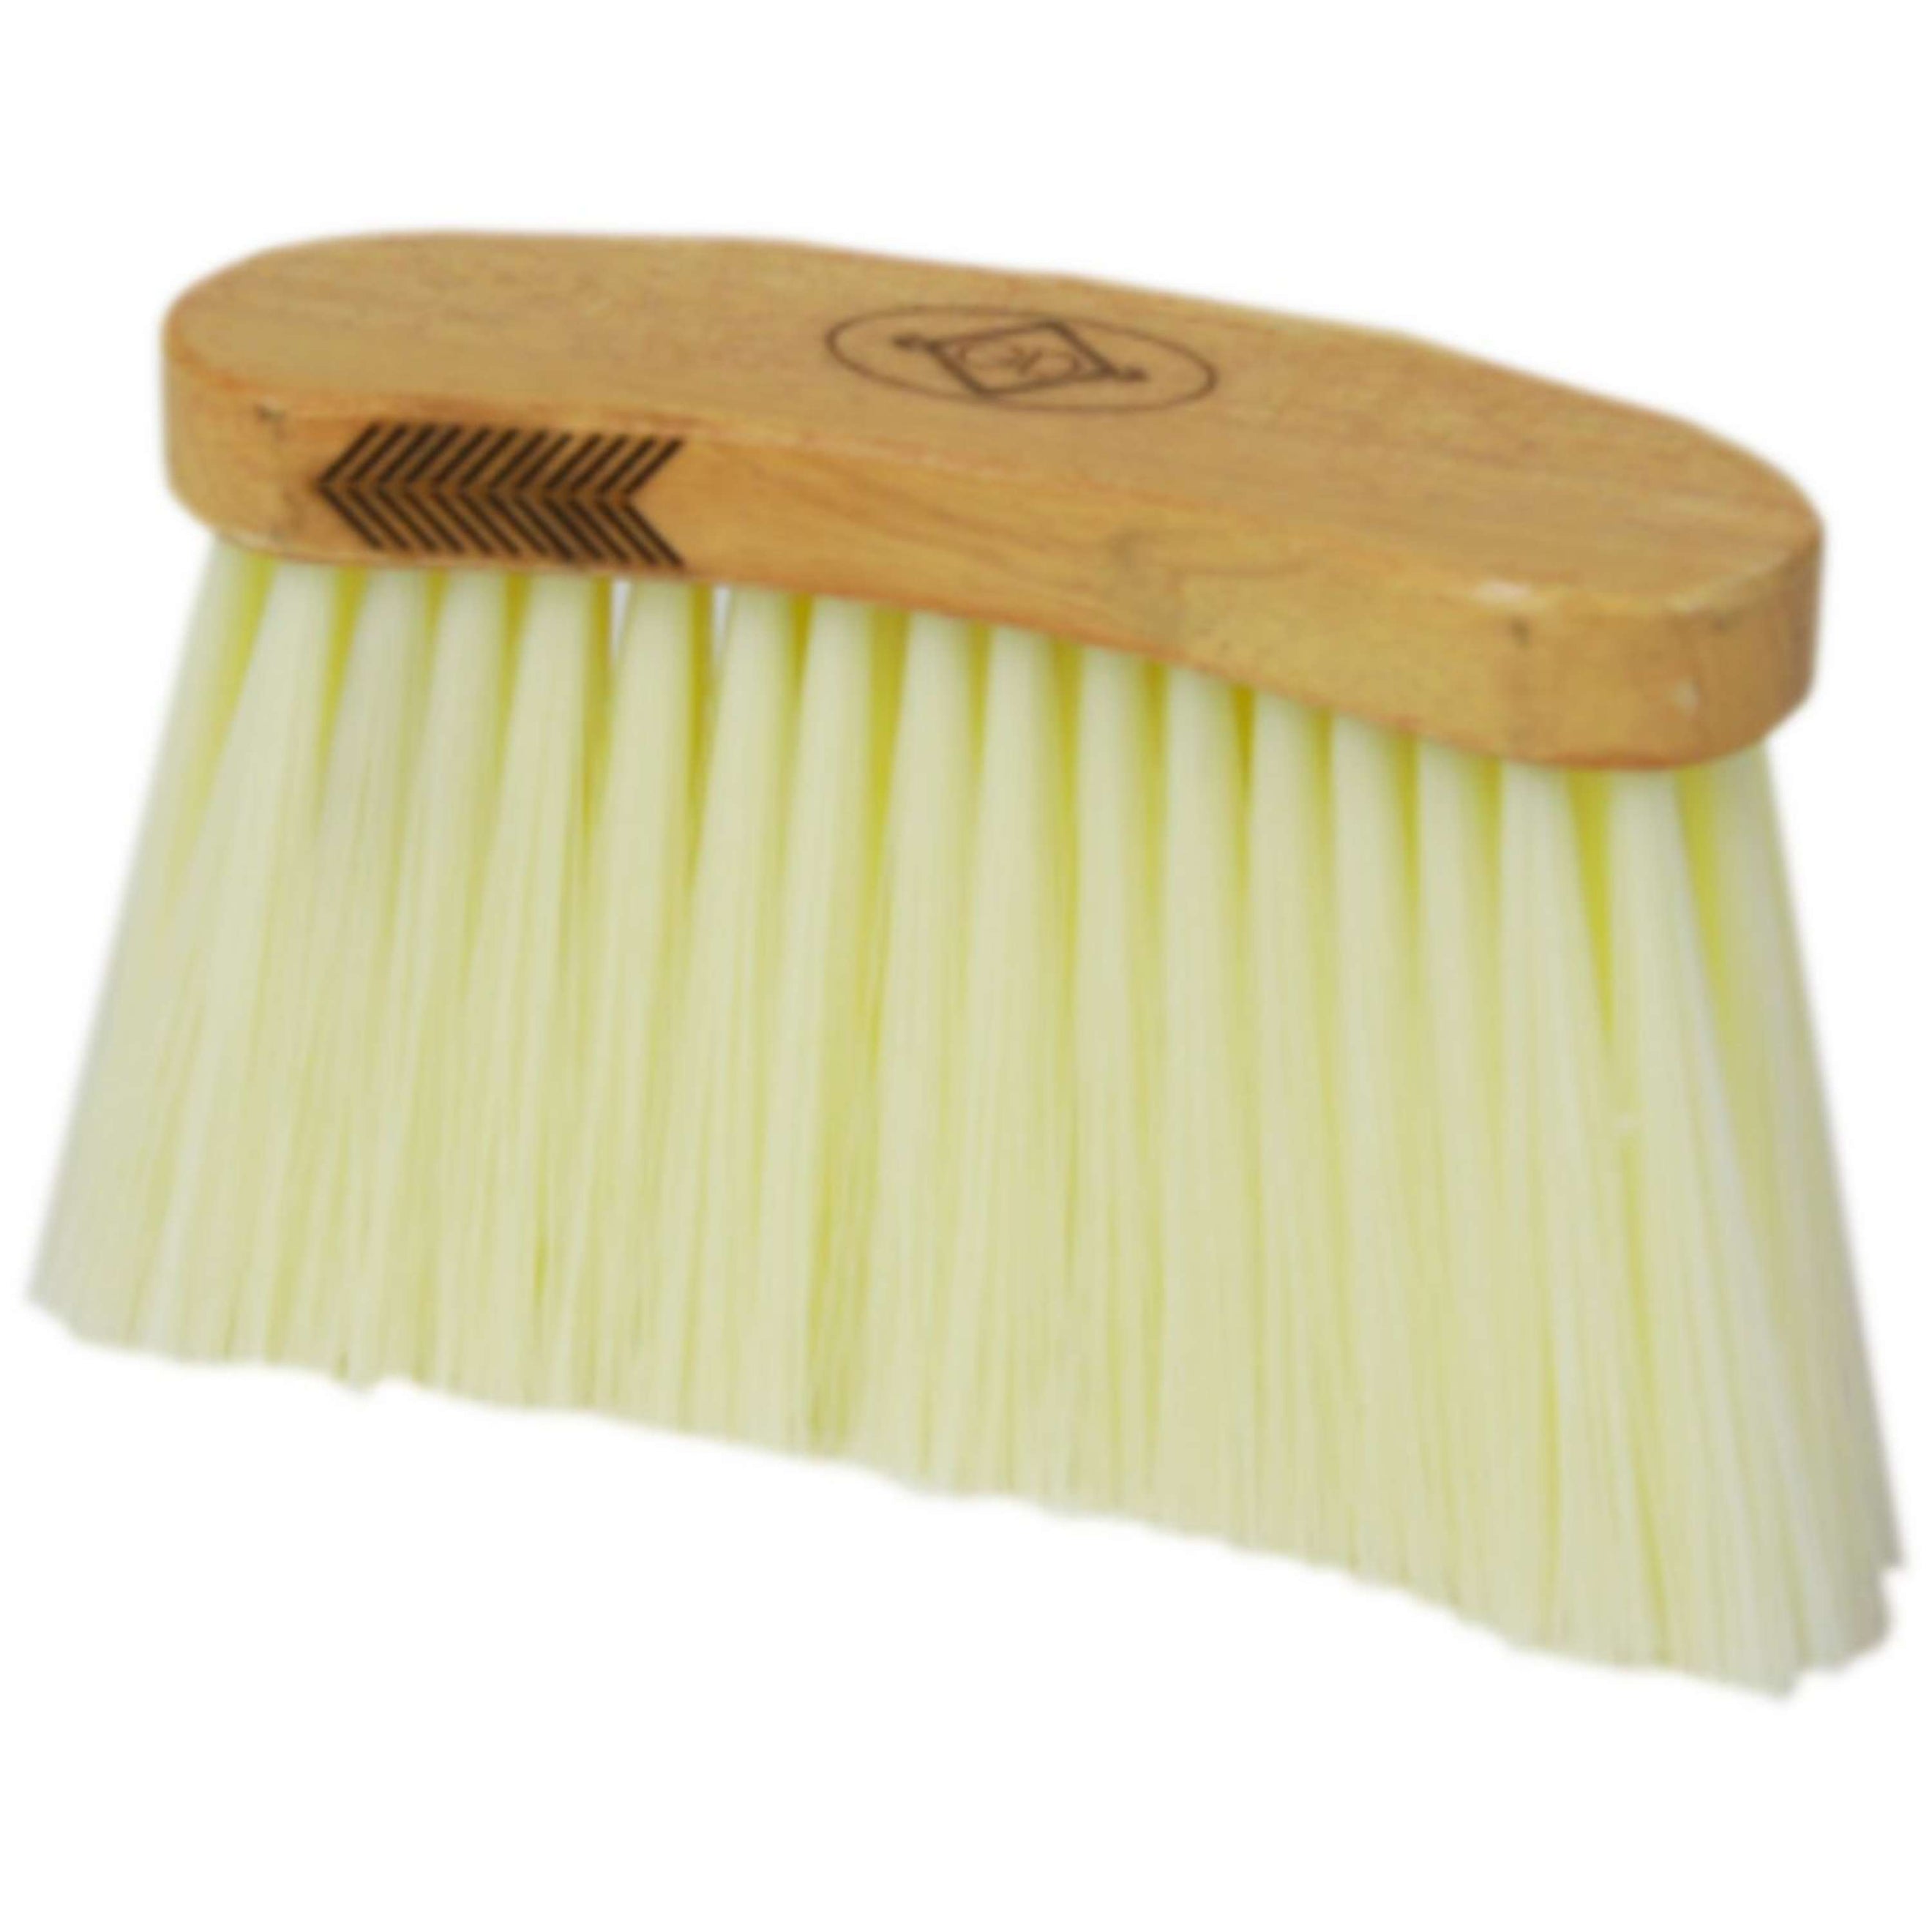 Grooming Deluxe by Kentucky Brosse Middle Long Naturel